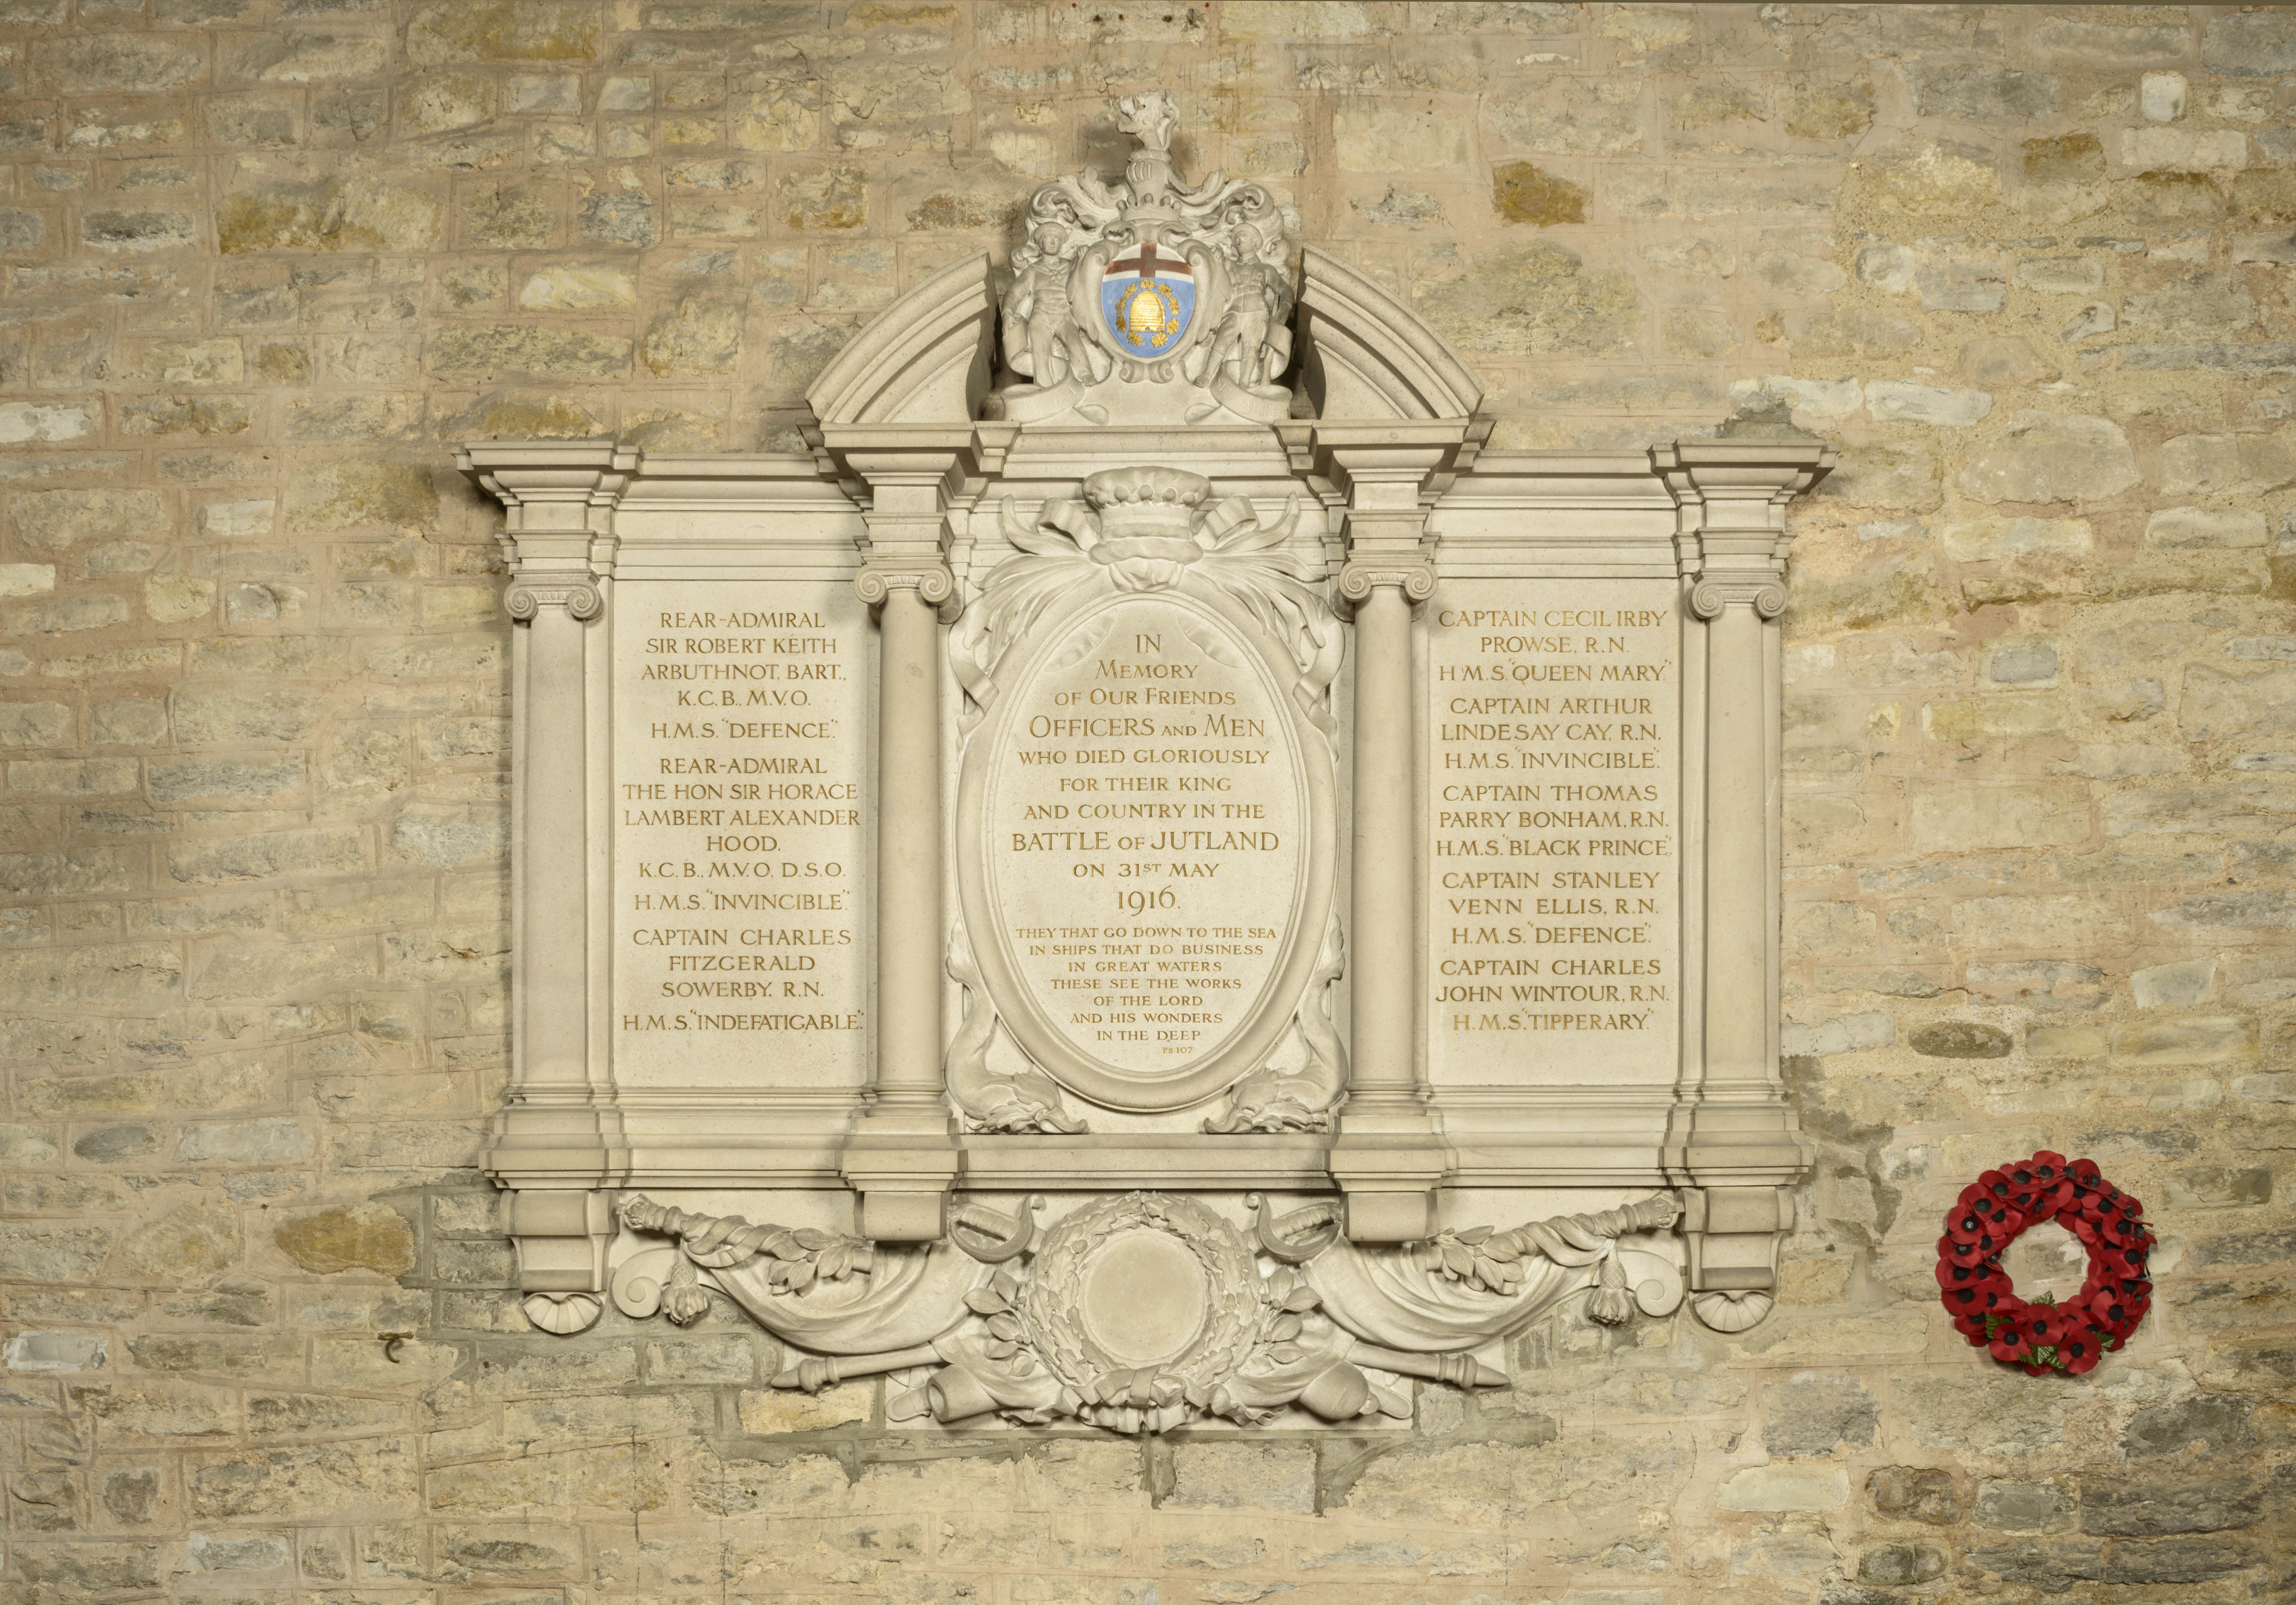 Jutland War Memorial Plaque at St Michael & All Angels Church, Brooksby near Melton Mowbray, Leicestershire. © Historic England